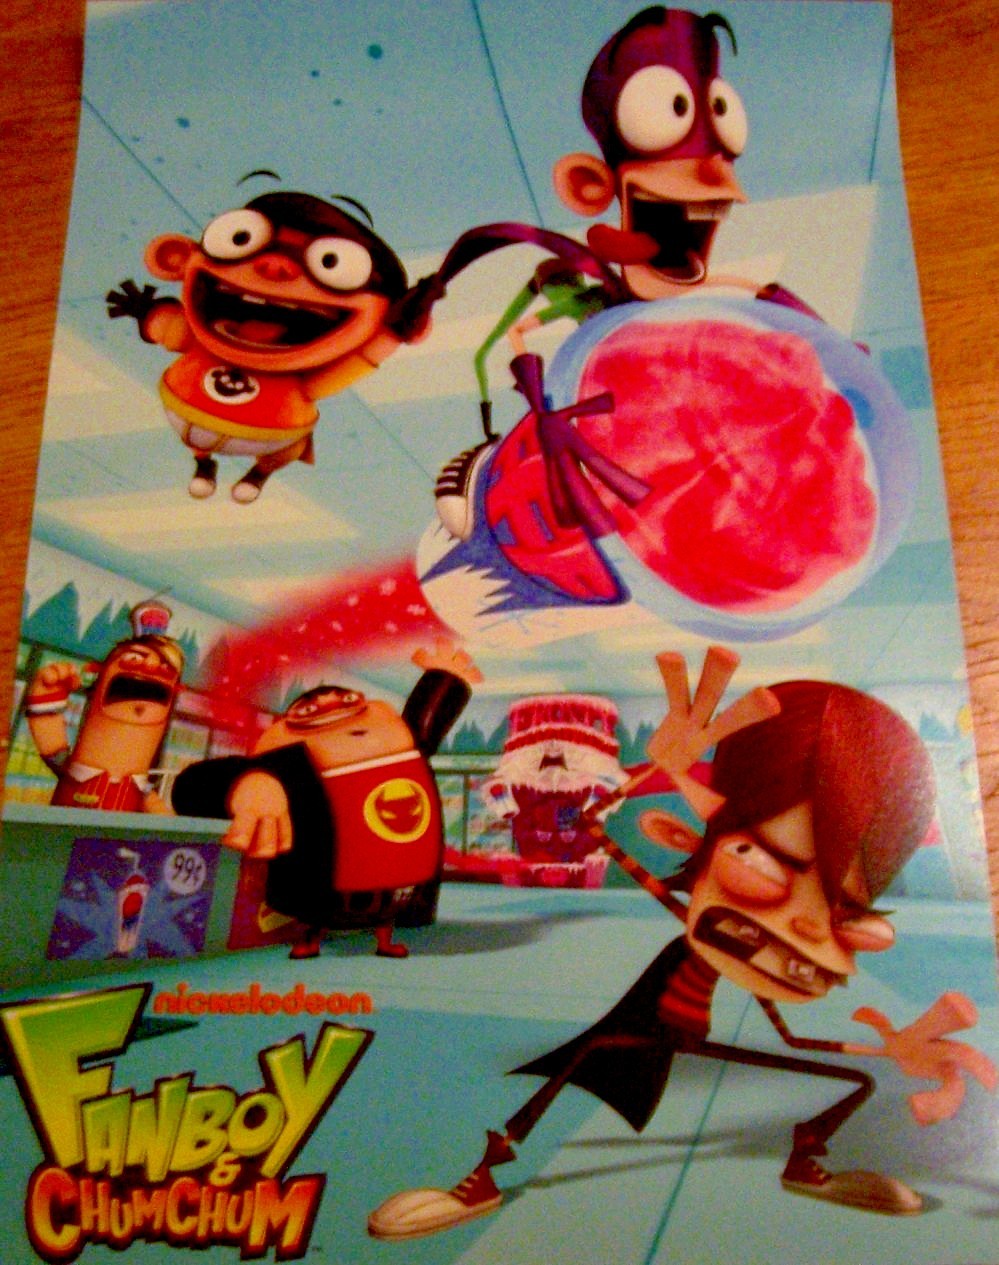 Fanboy and ChumChum 2010 Comic-Con promo poster